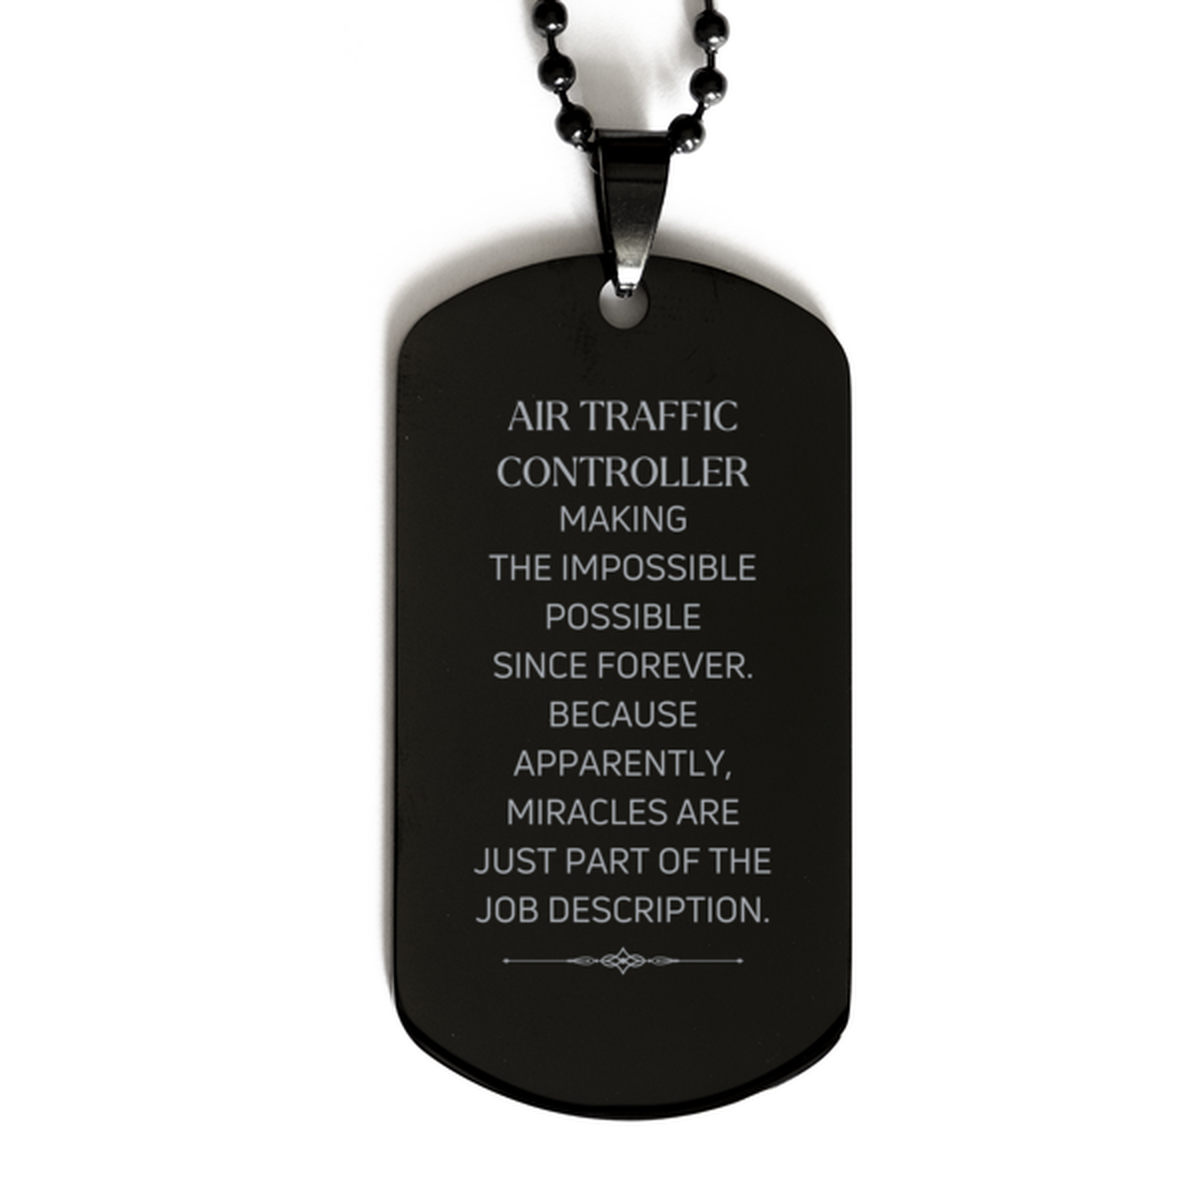 Funny Air Traffic Controller Gifts, Miracles are just part of the job description, Inspirational Birthday Black Dog Tag For Air Traffic Controller, Men, Women, Coworkers, Friends, Boss